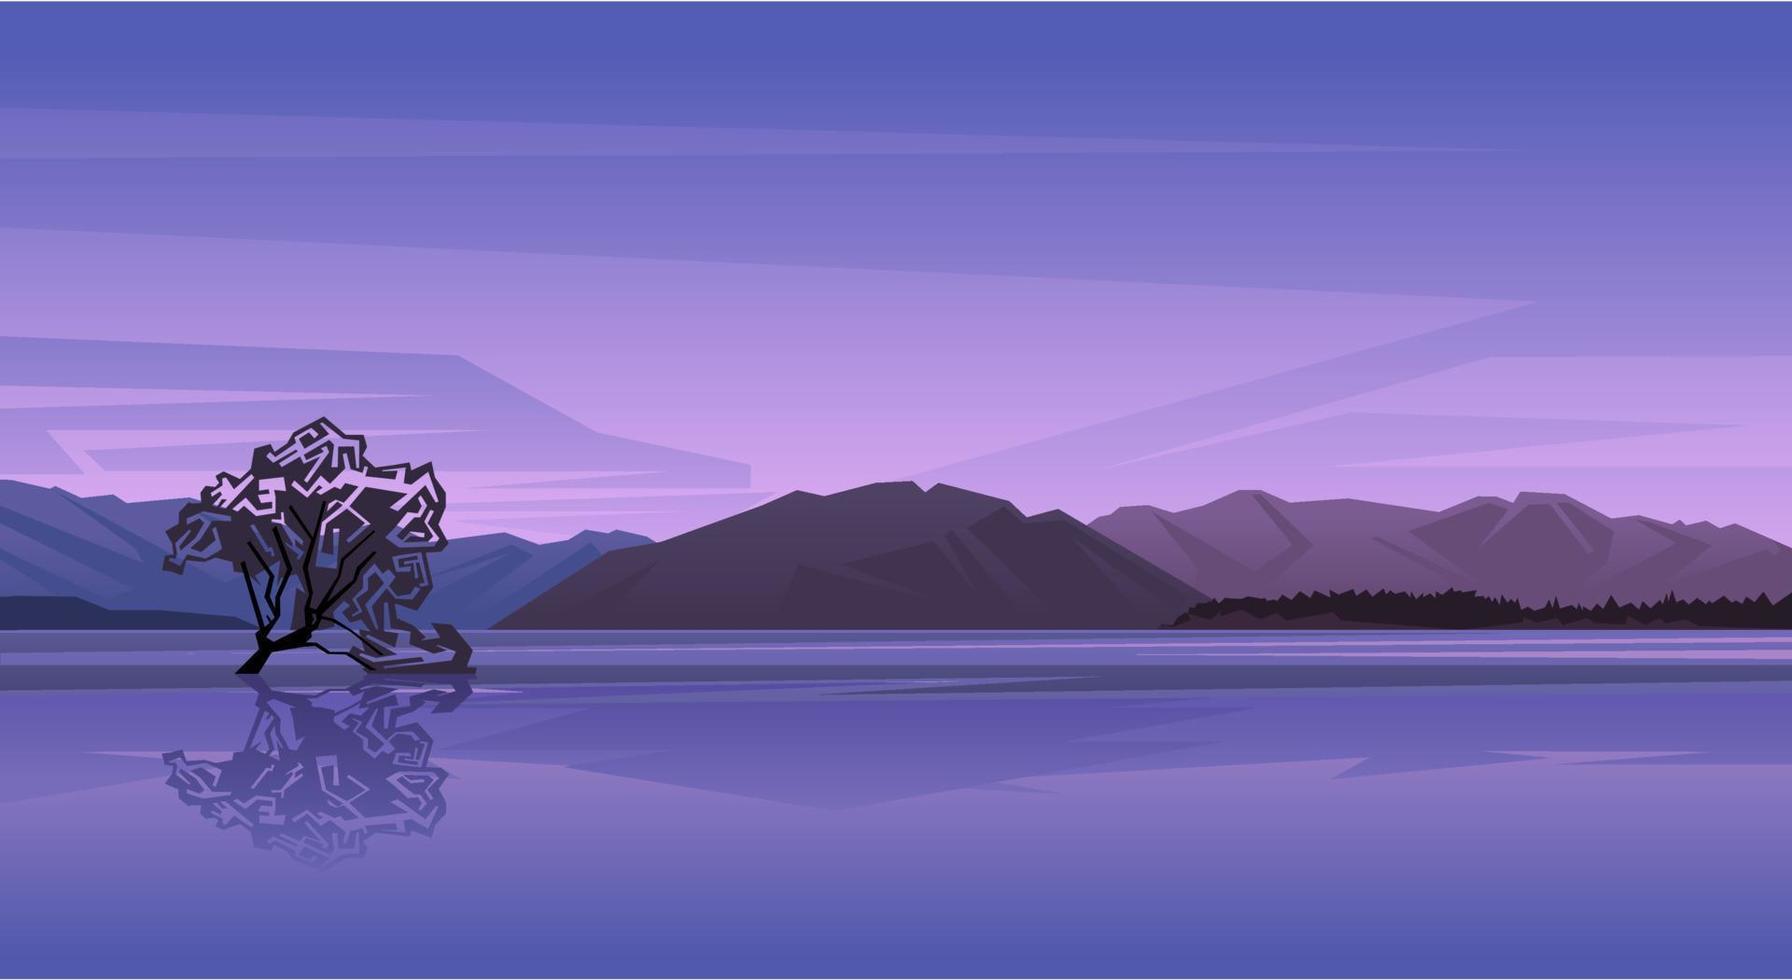 Natural landscape of lake, trees and hills, purple color background vector